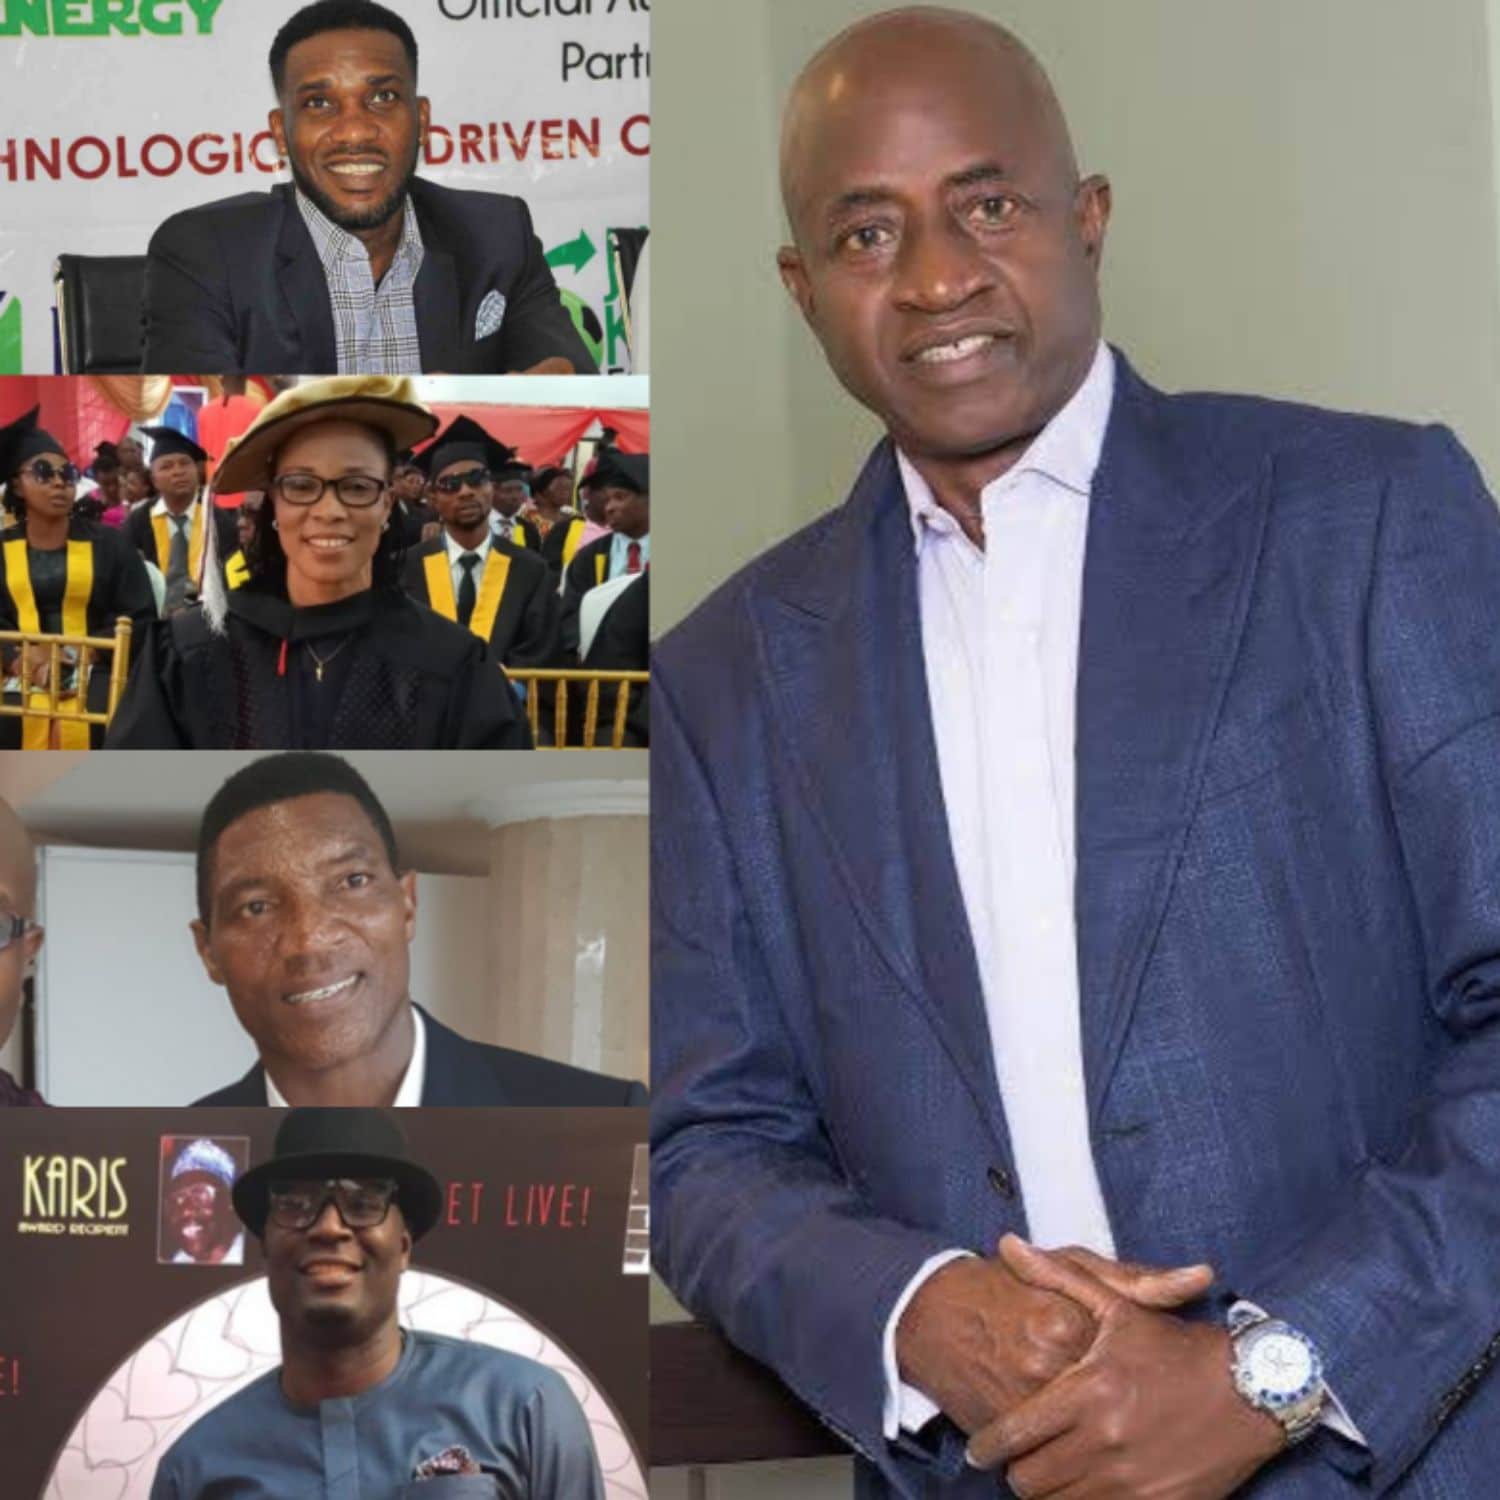 Odegbami: The Rise And Rise Of the Power Of Athletes!